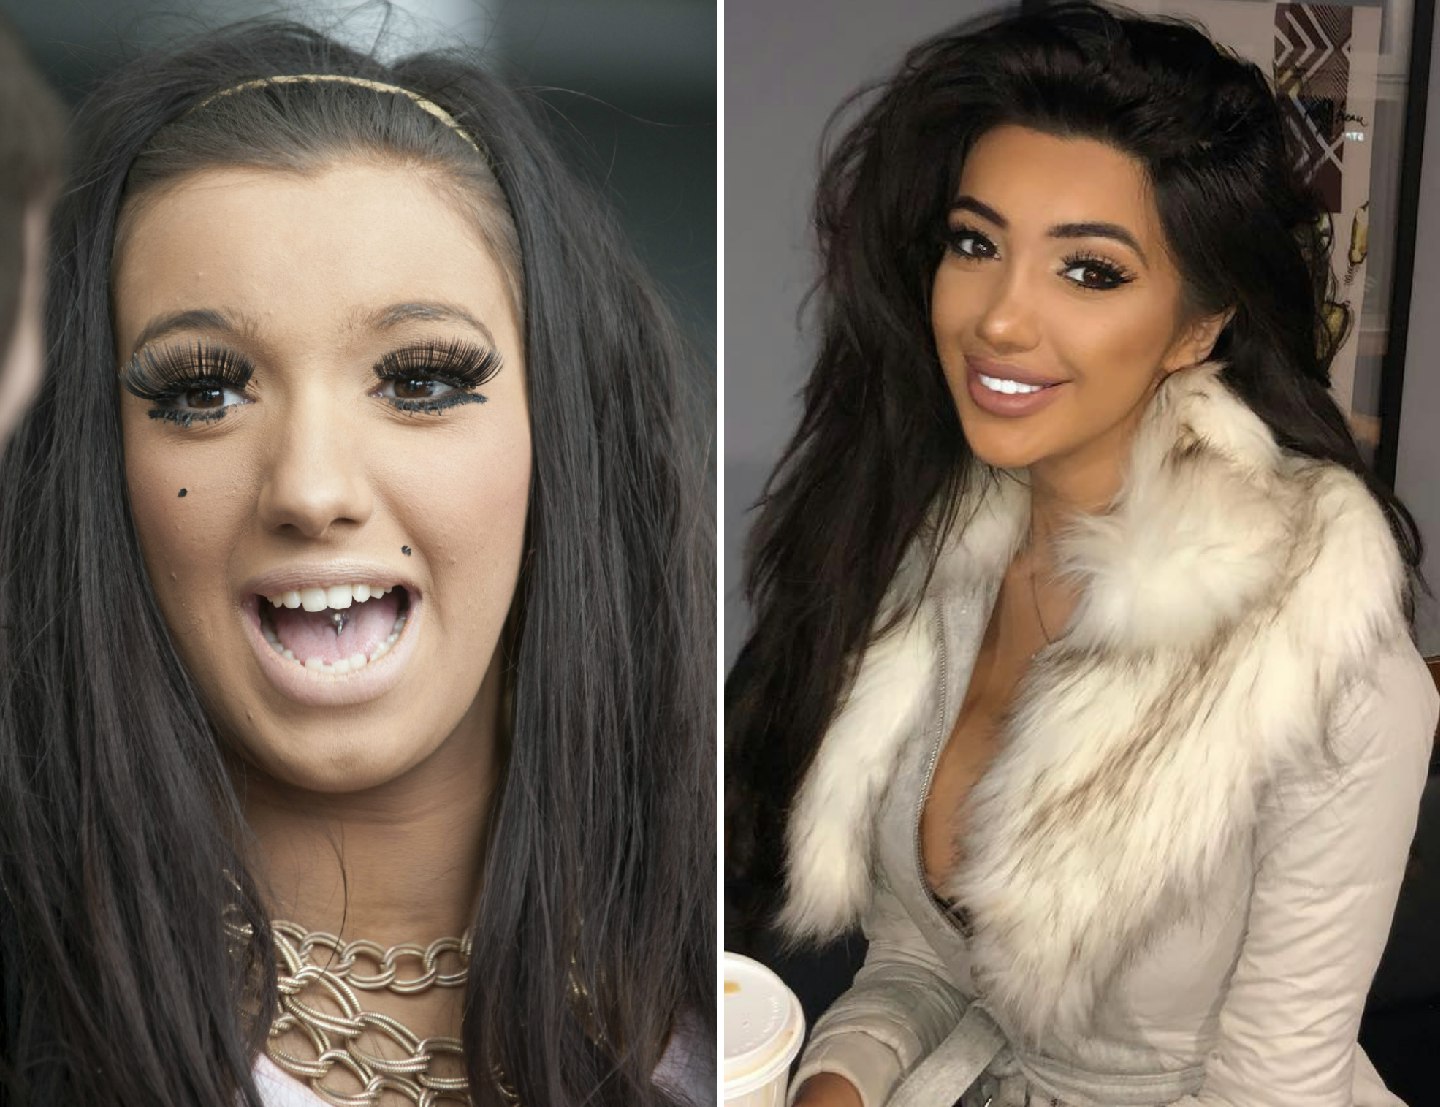 Chloe Khan before and after plastic surgery